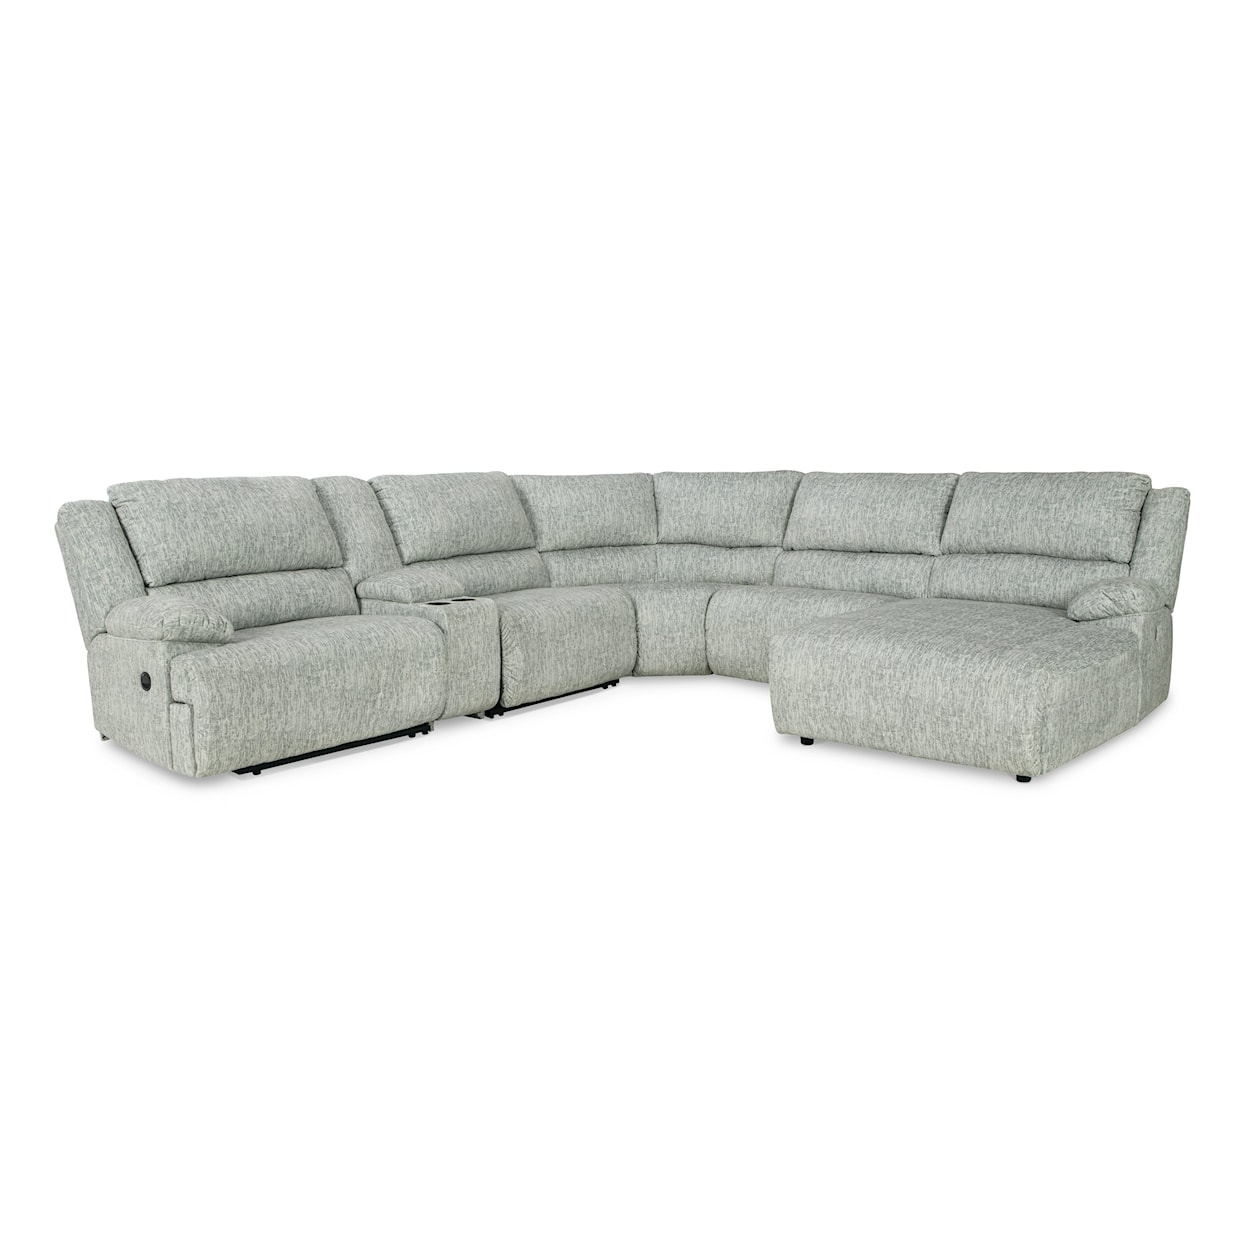 StyleLine ECLIPSE 6-Piece Reclining Sectional with Chaise